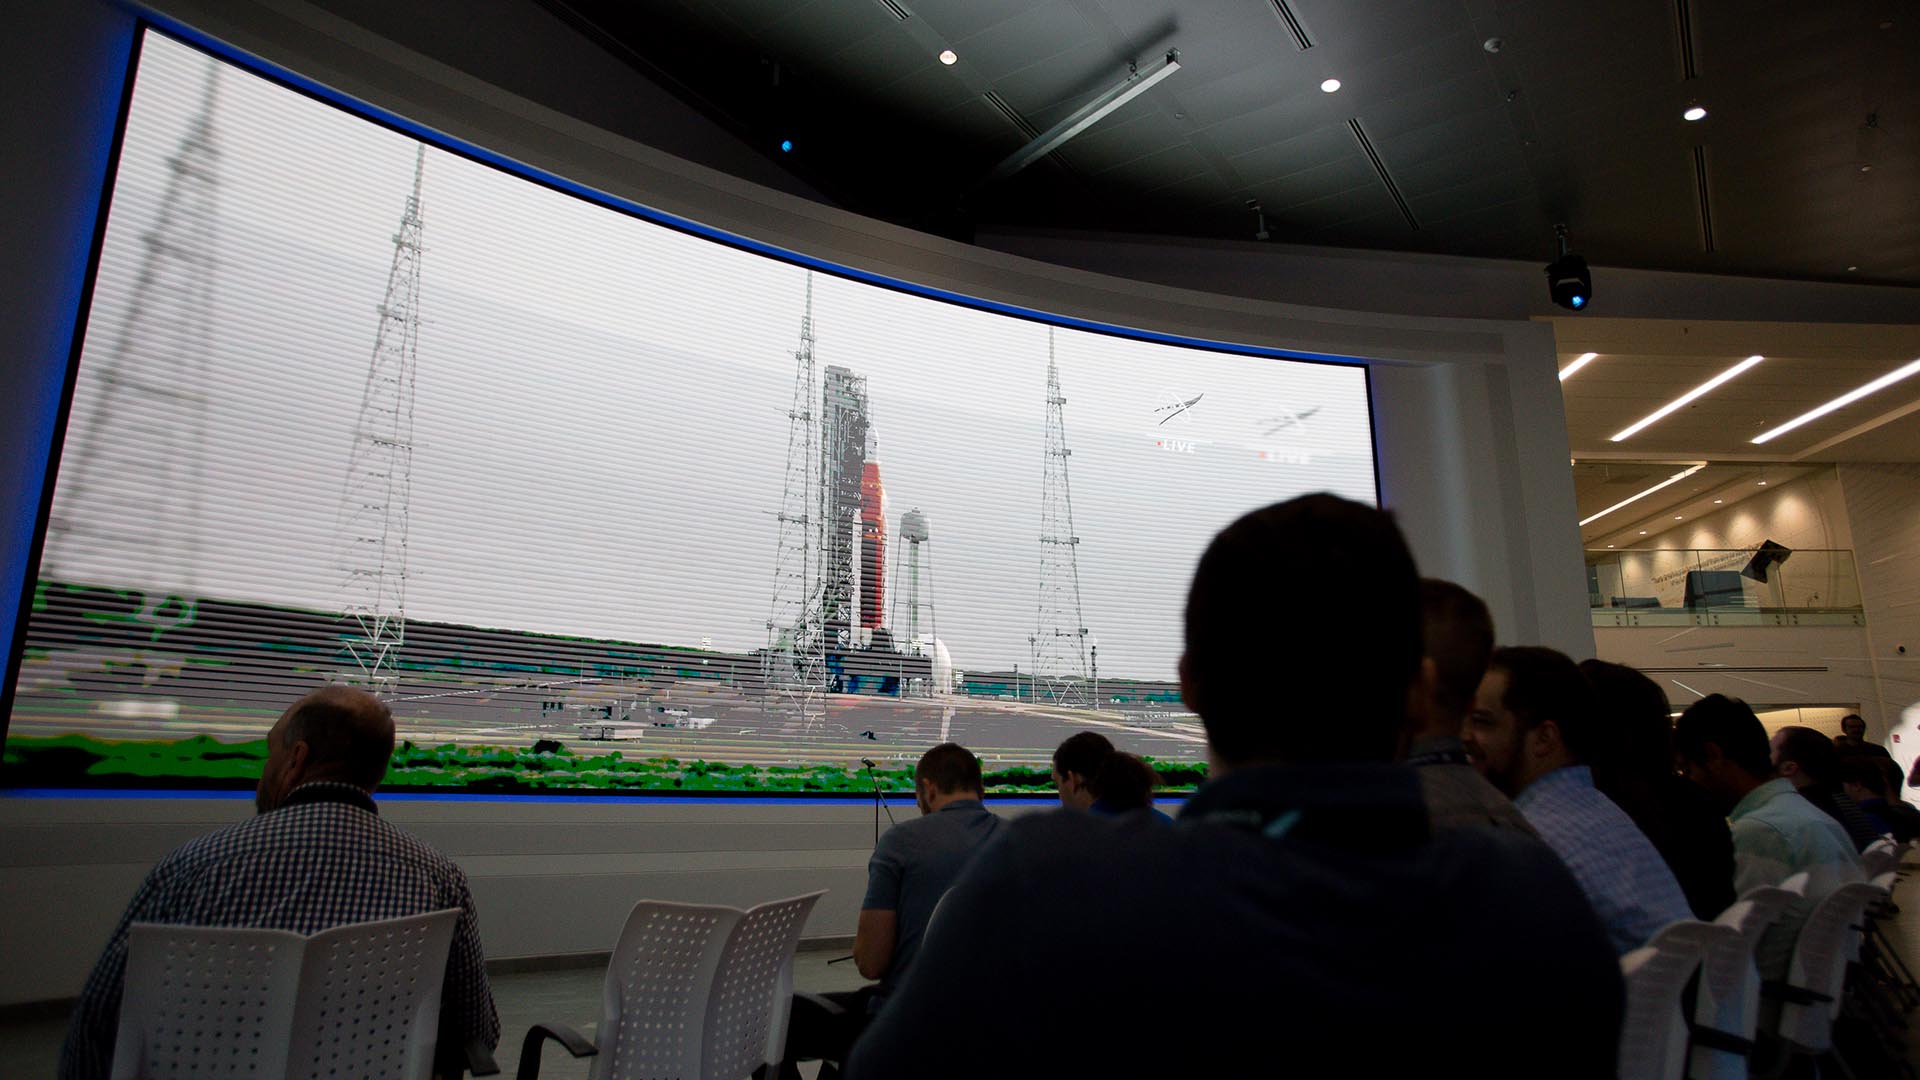 Engineers and administrators at Lockheed Martin gathered to watch the launch of Artemis I from Kennedy Space Center Monday morning.